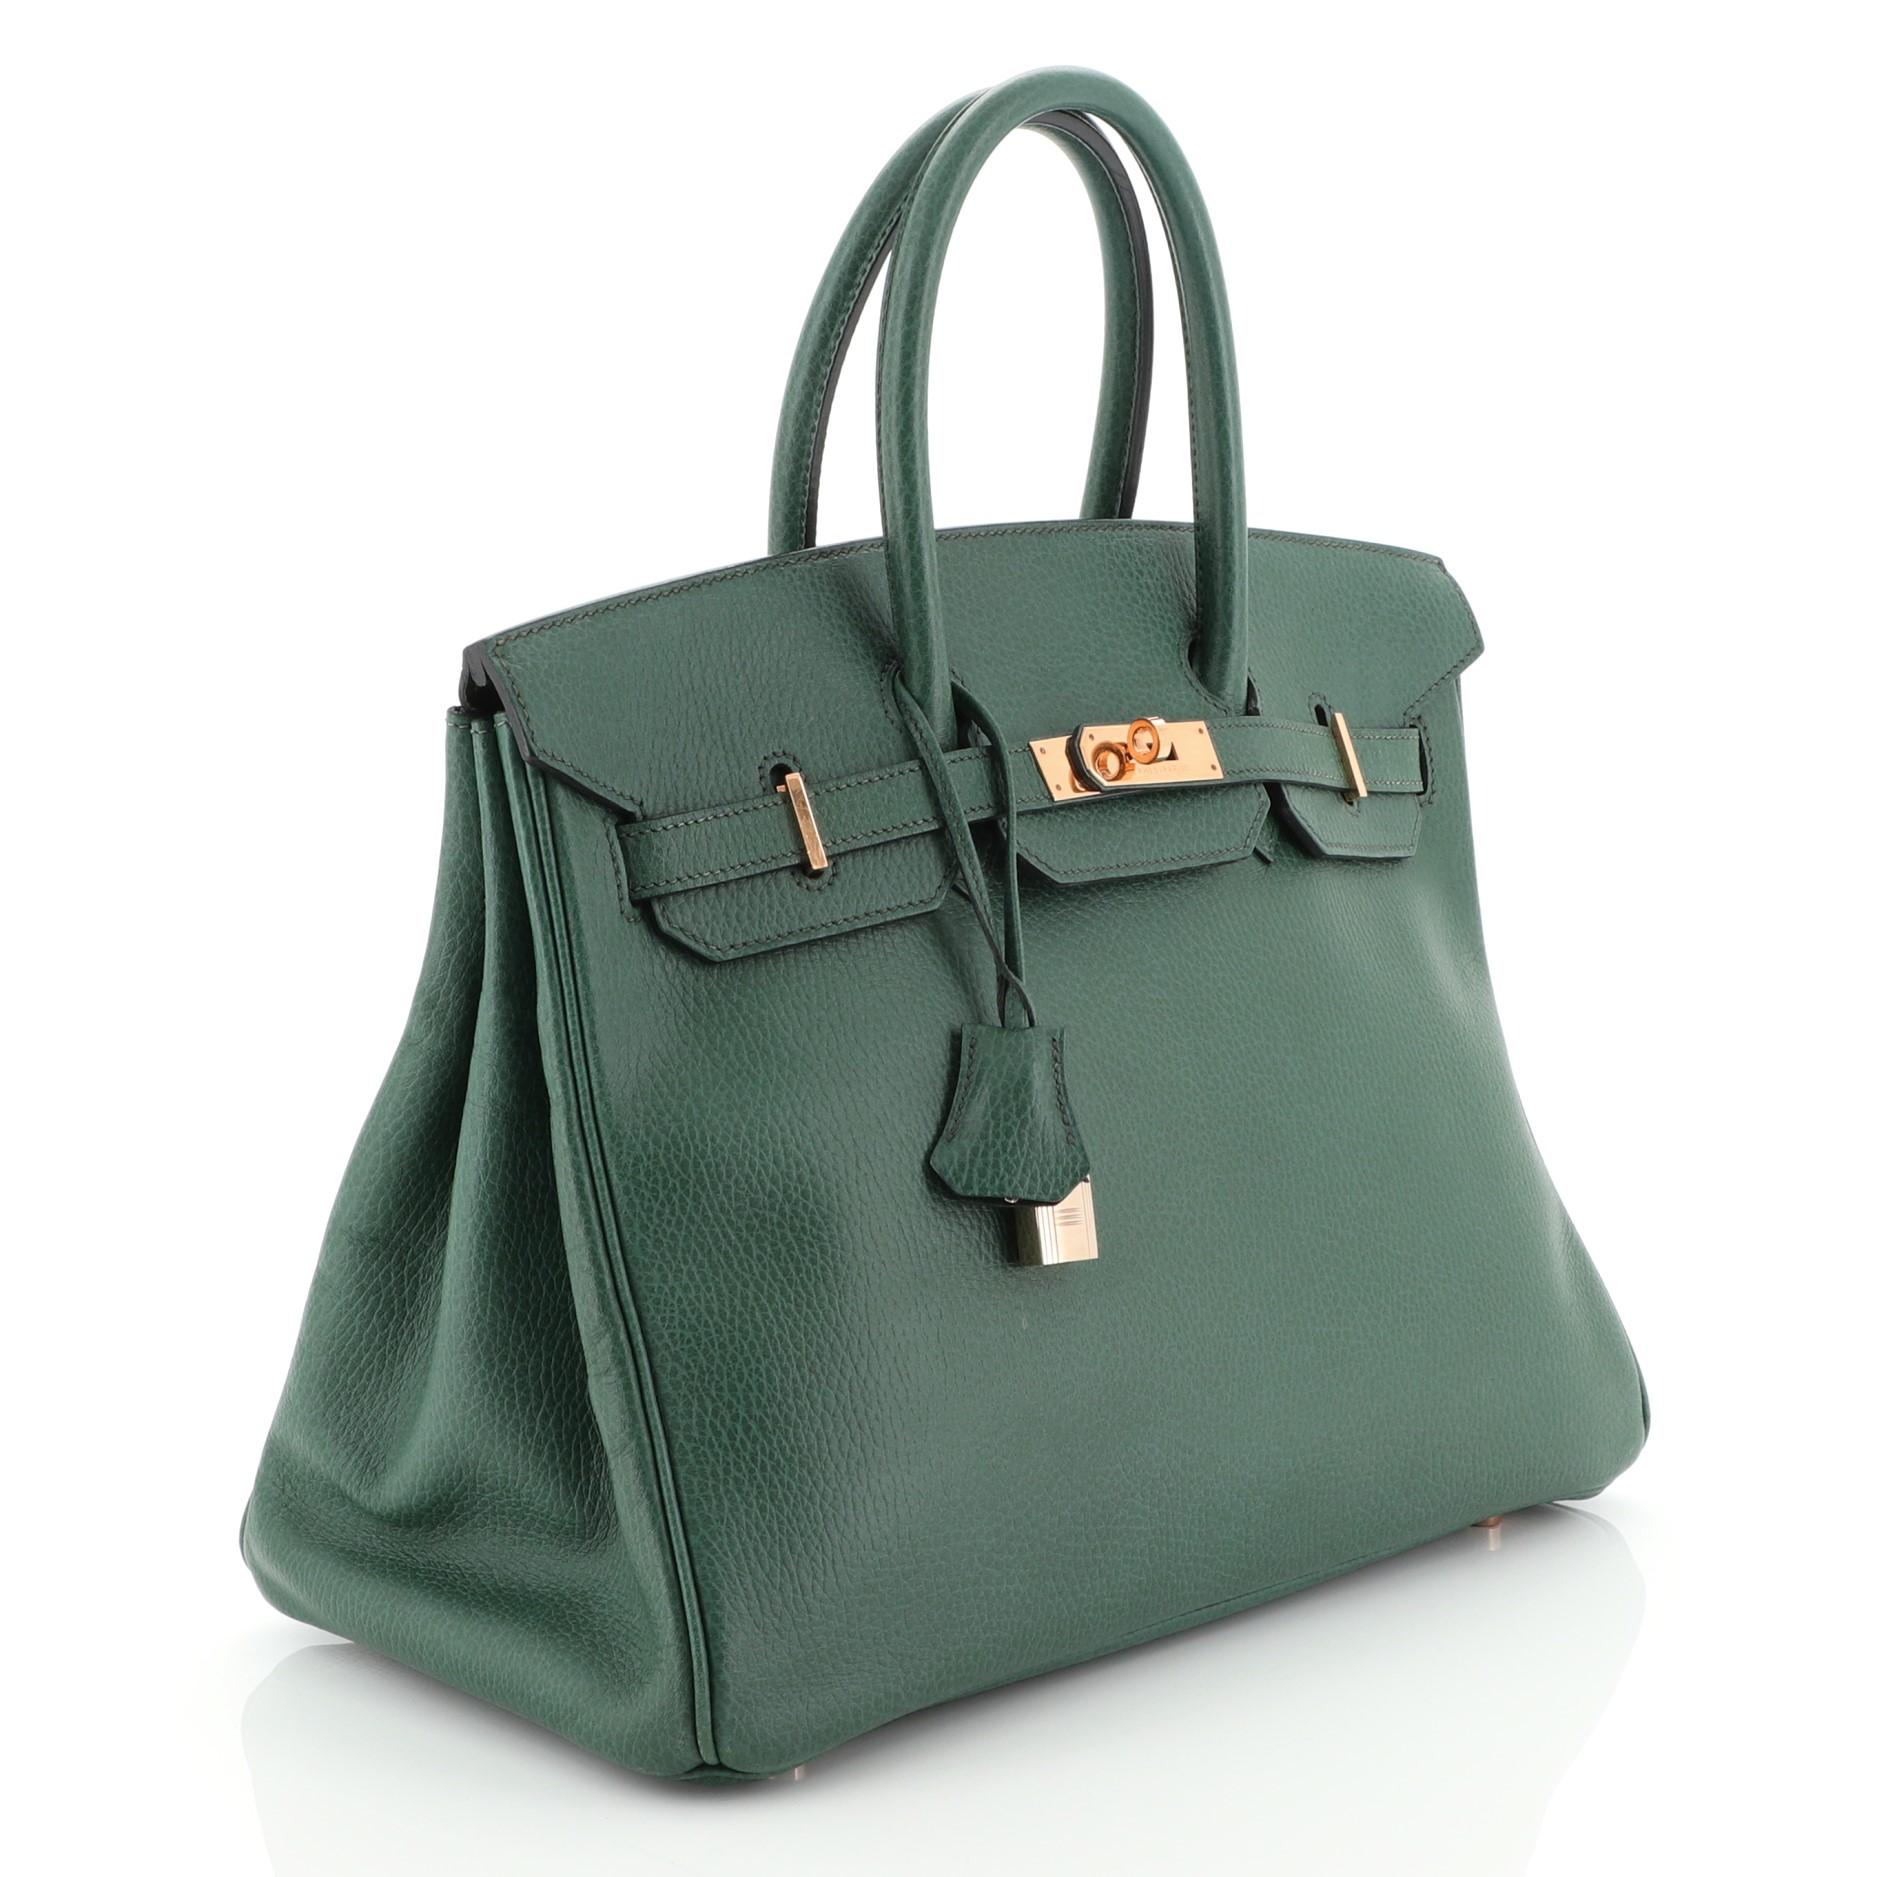 This Hermes Birkin Handbag Vert Clair Ardennes with Gold Hardware 35, crafted in Vert Clair green Ardennes leather, features dual rolled handles, front flap, and gold hardware. Its turn-lock closure opens to a Vert Clair green Chevre leather